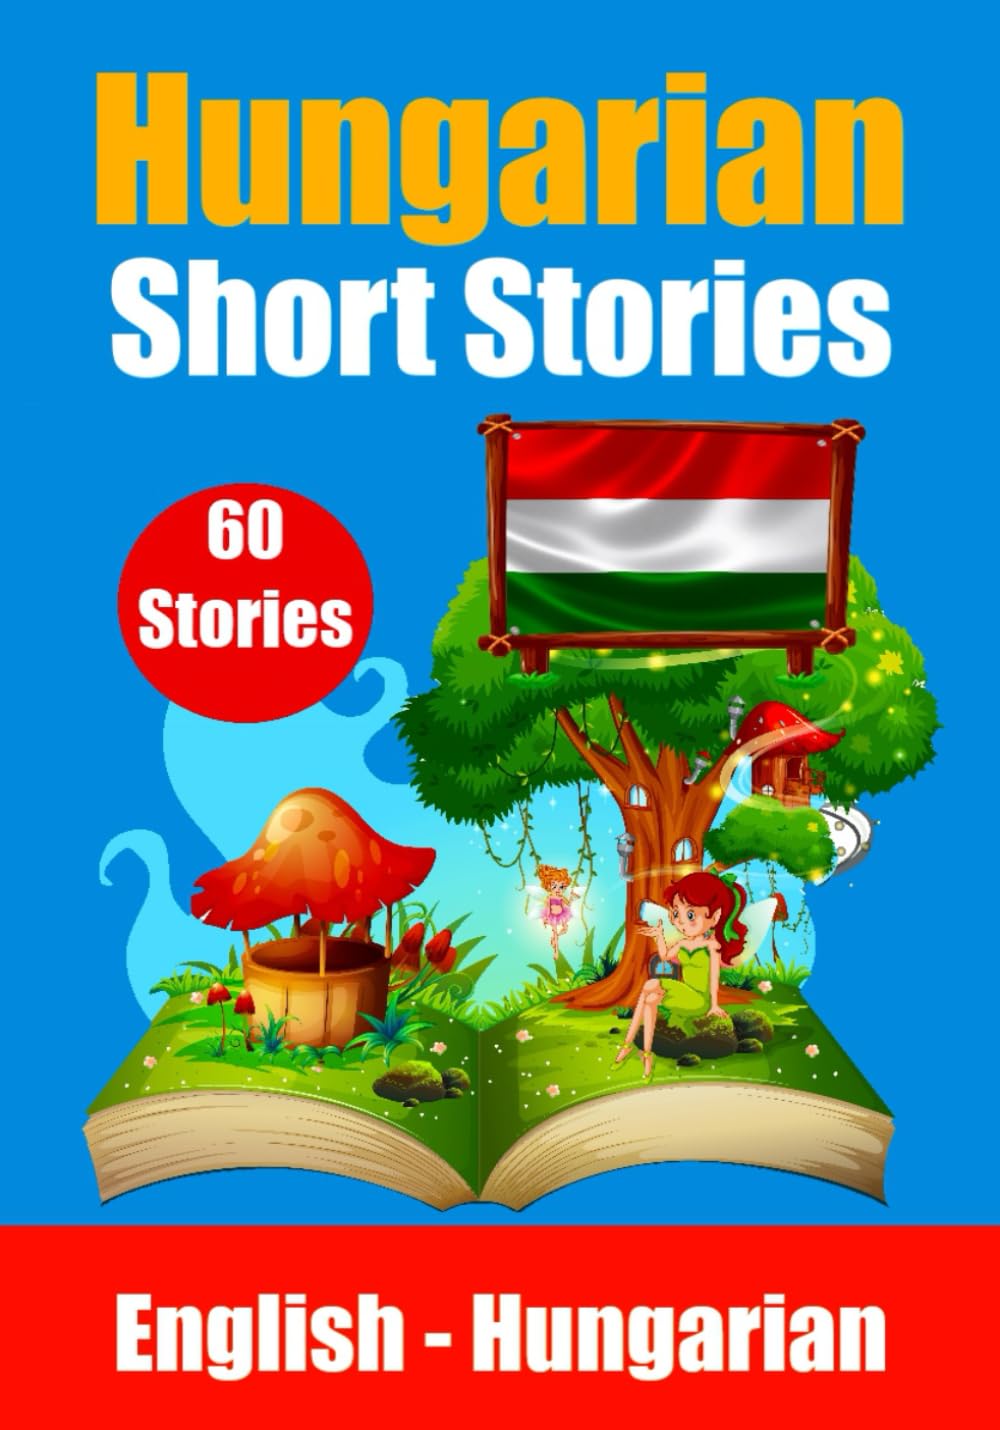 Short Stories in Hungarian